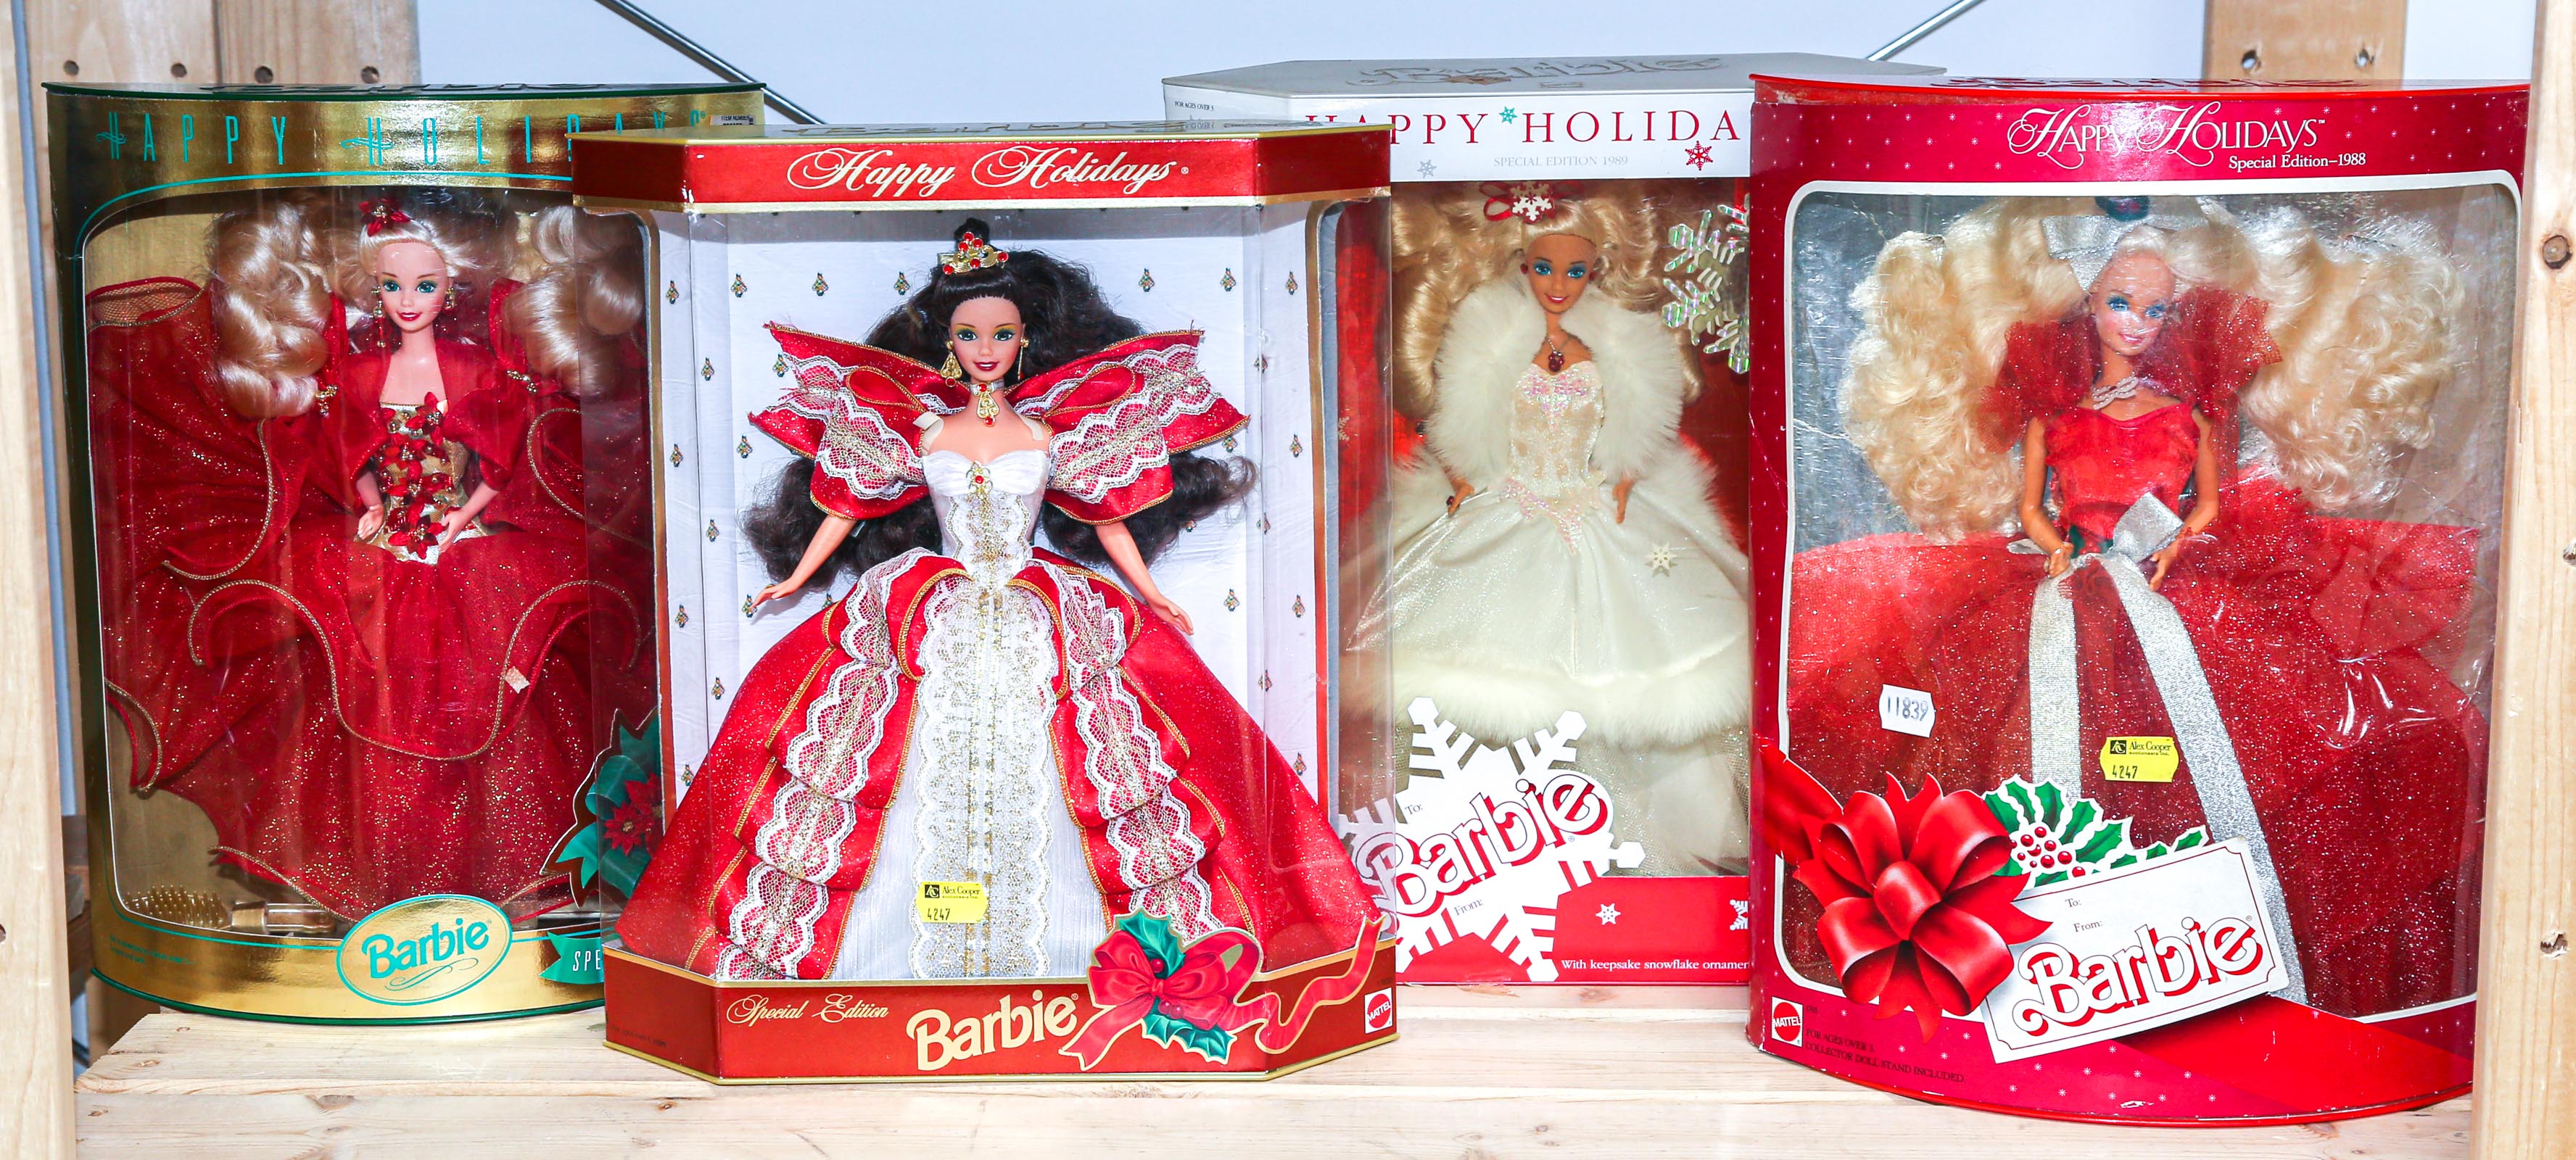 FOUR BOXED HAPPY HOLIDAY BARBIES 2e8c15